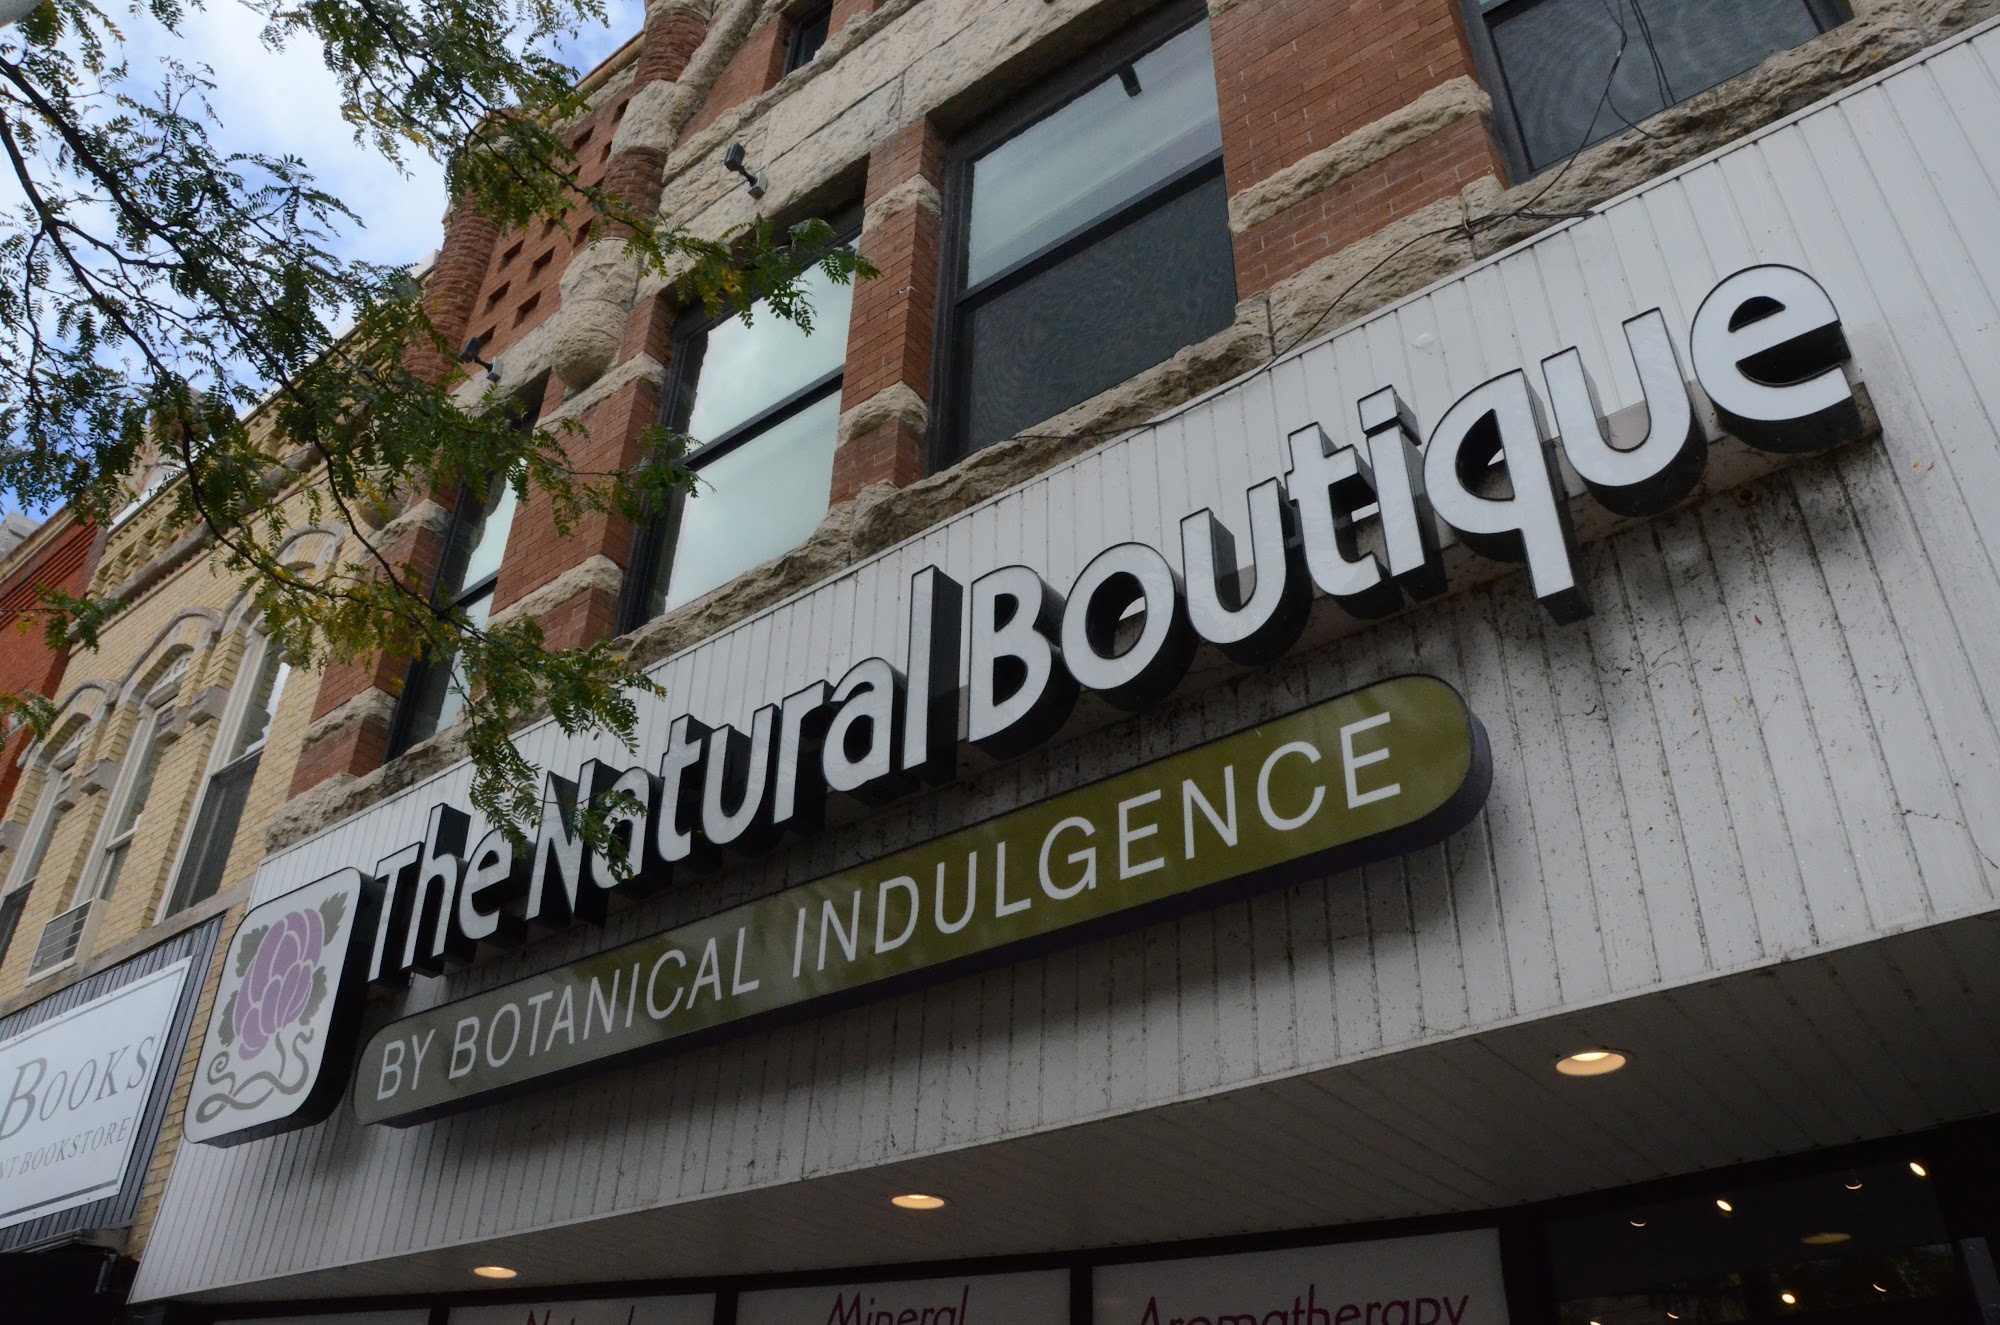 The Natural Boutique